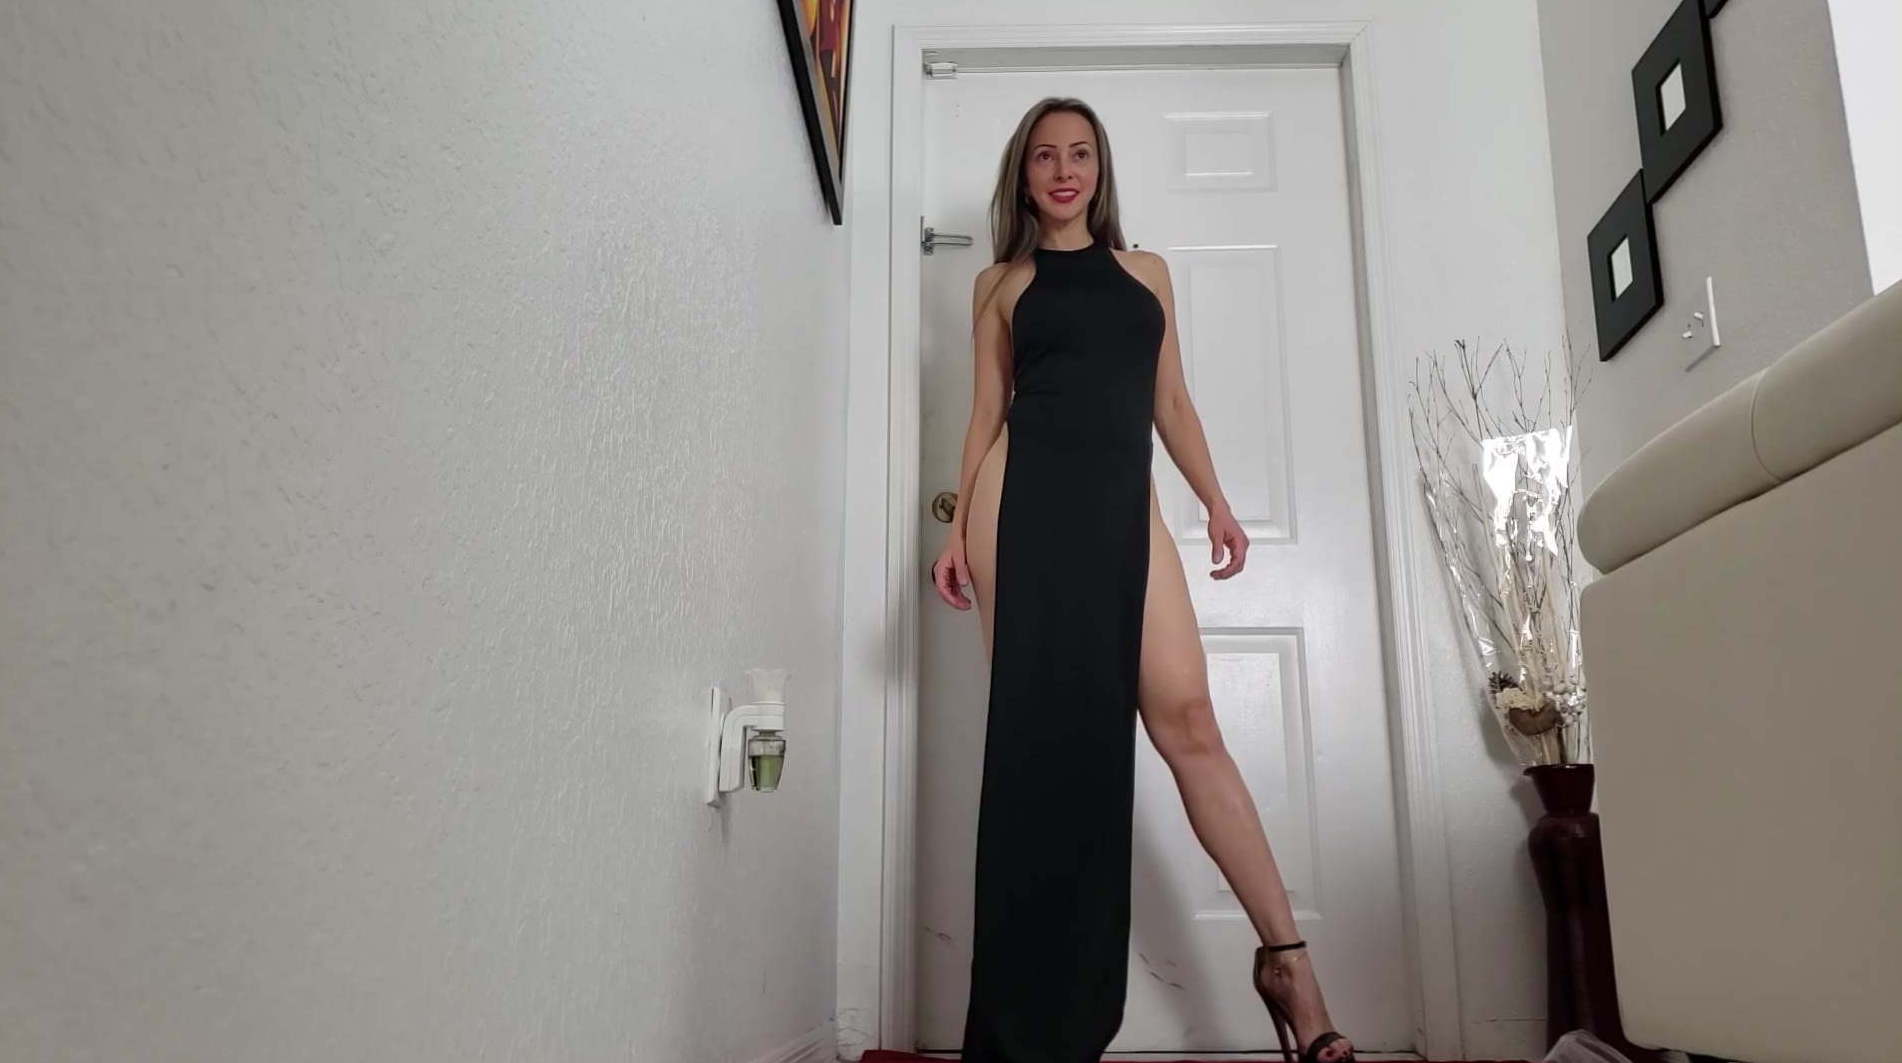 High Heels Dress Porno Pictures